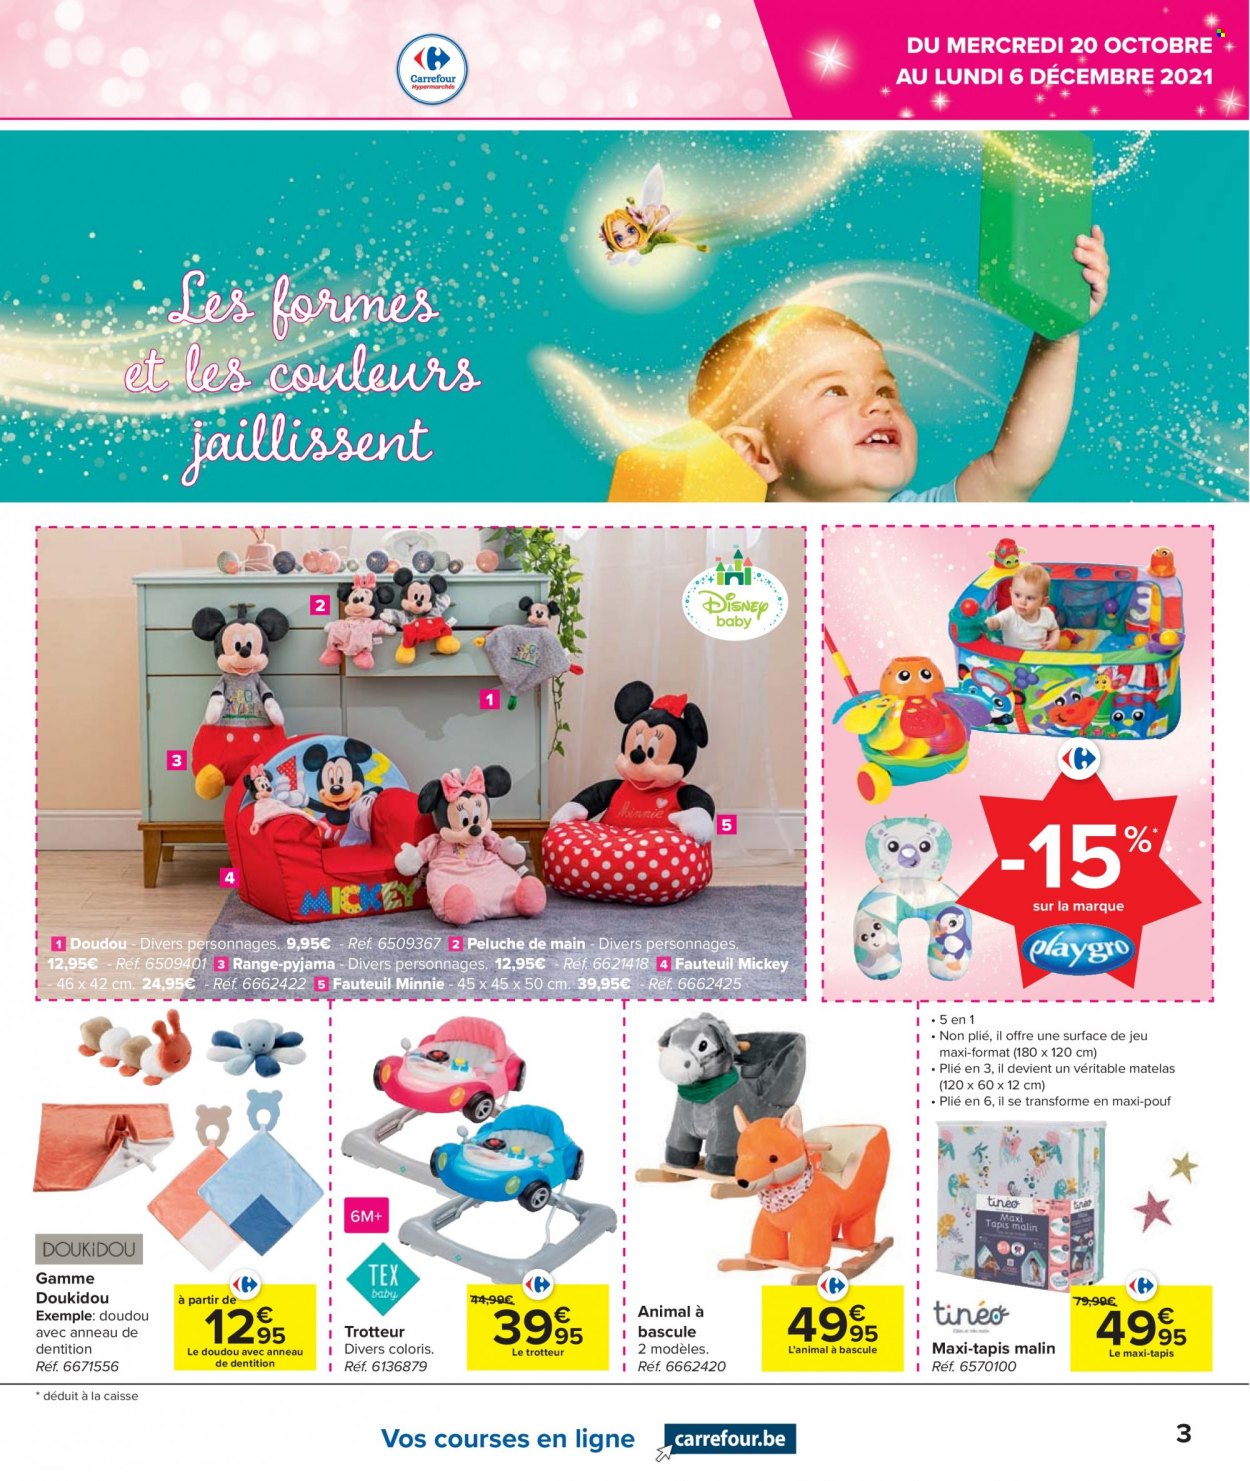 Catalogue Carrefour hypermarkt - 20.10.2021 - 6.12.2021. Page 3.